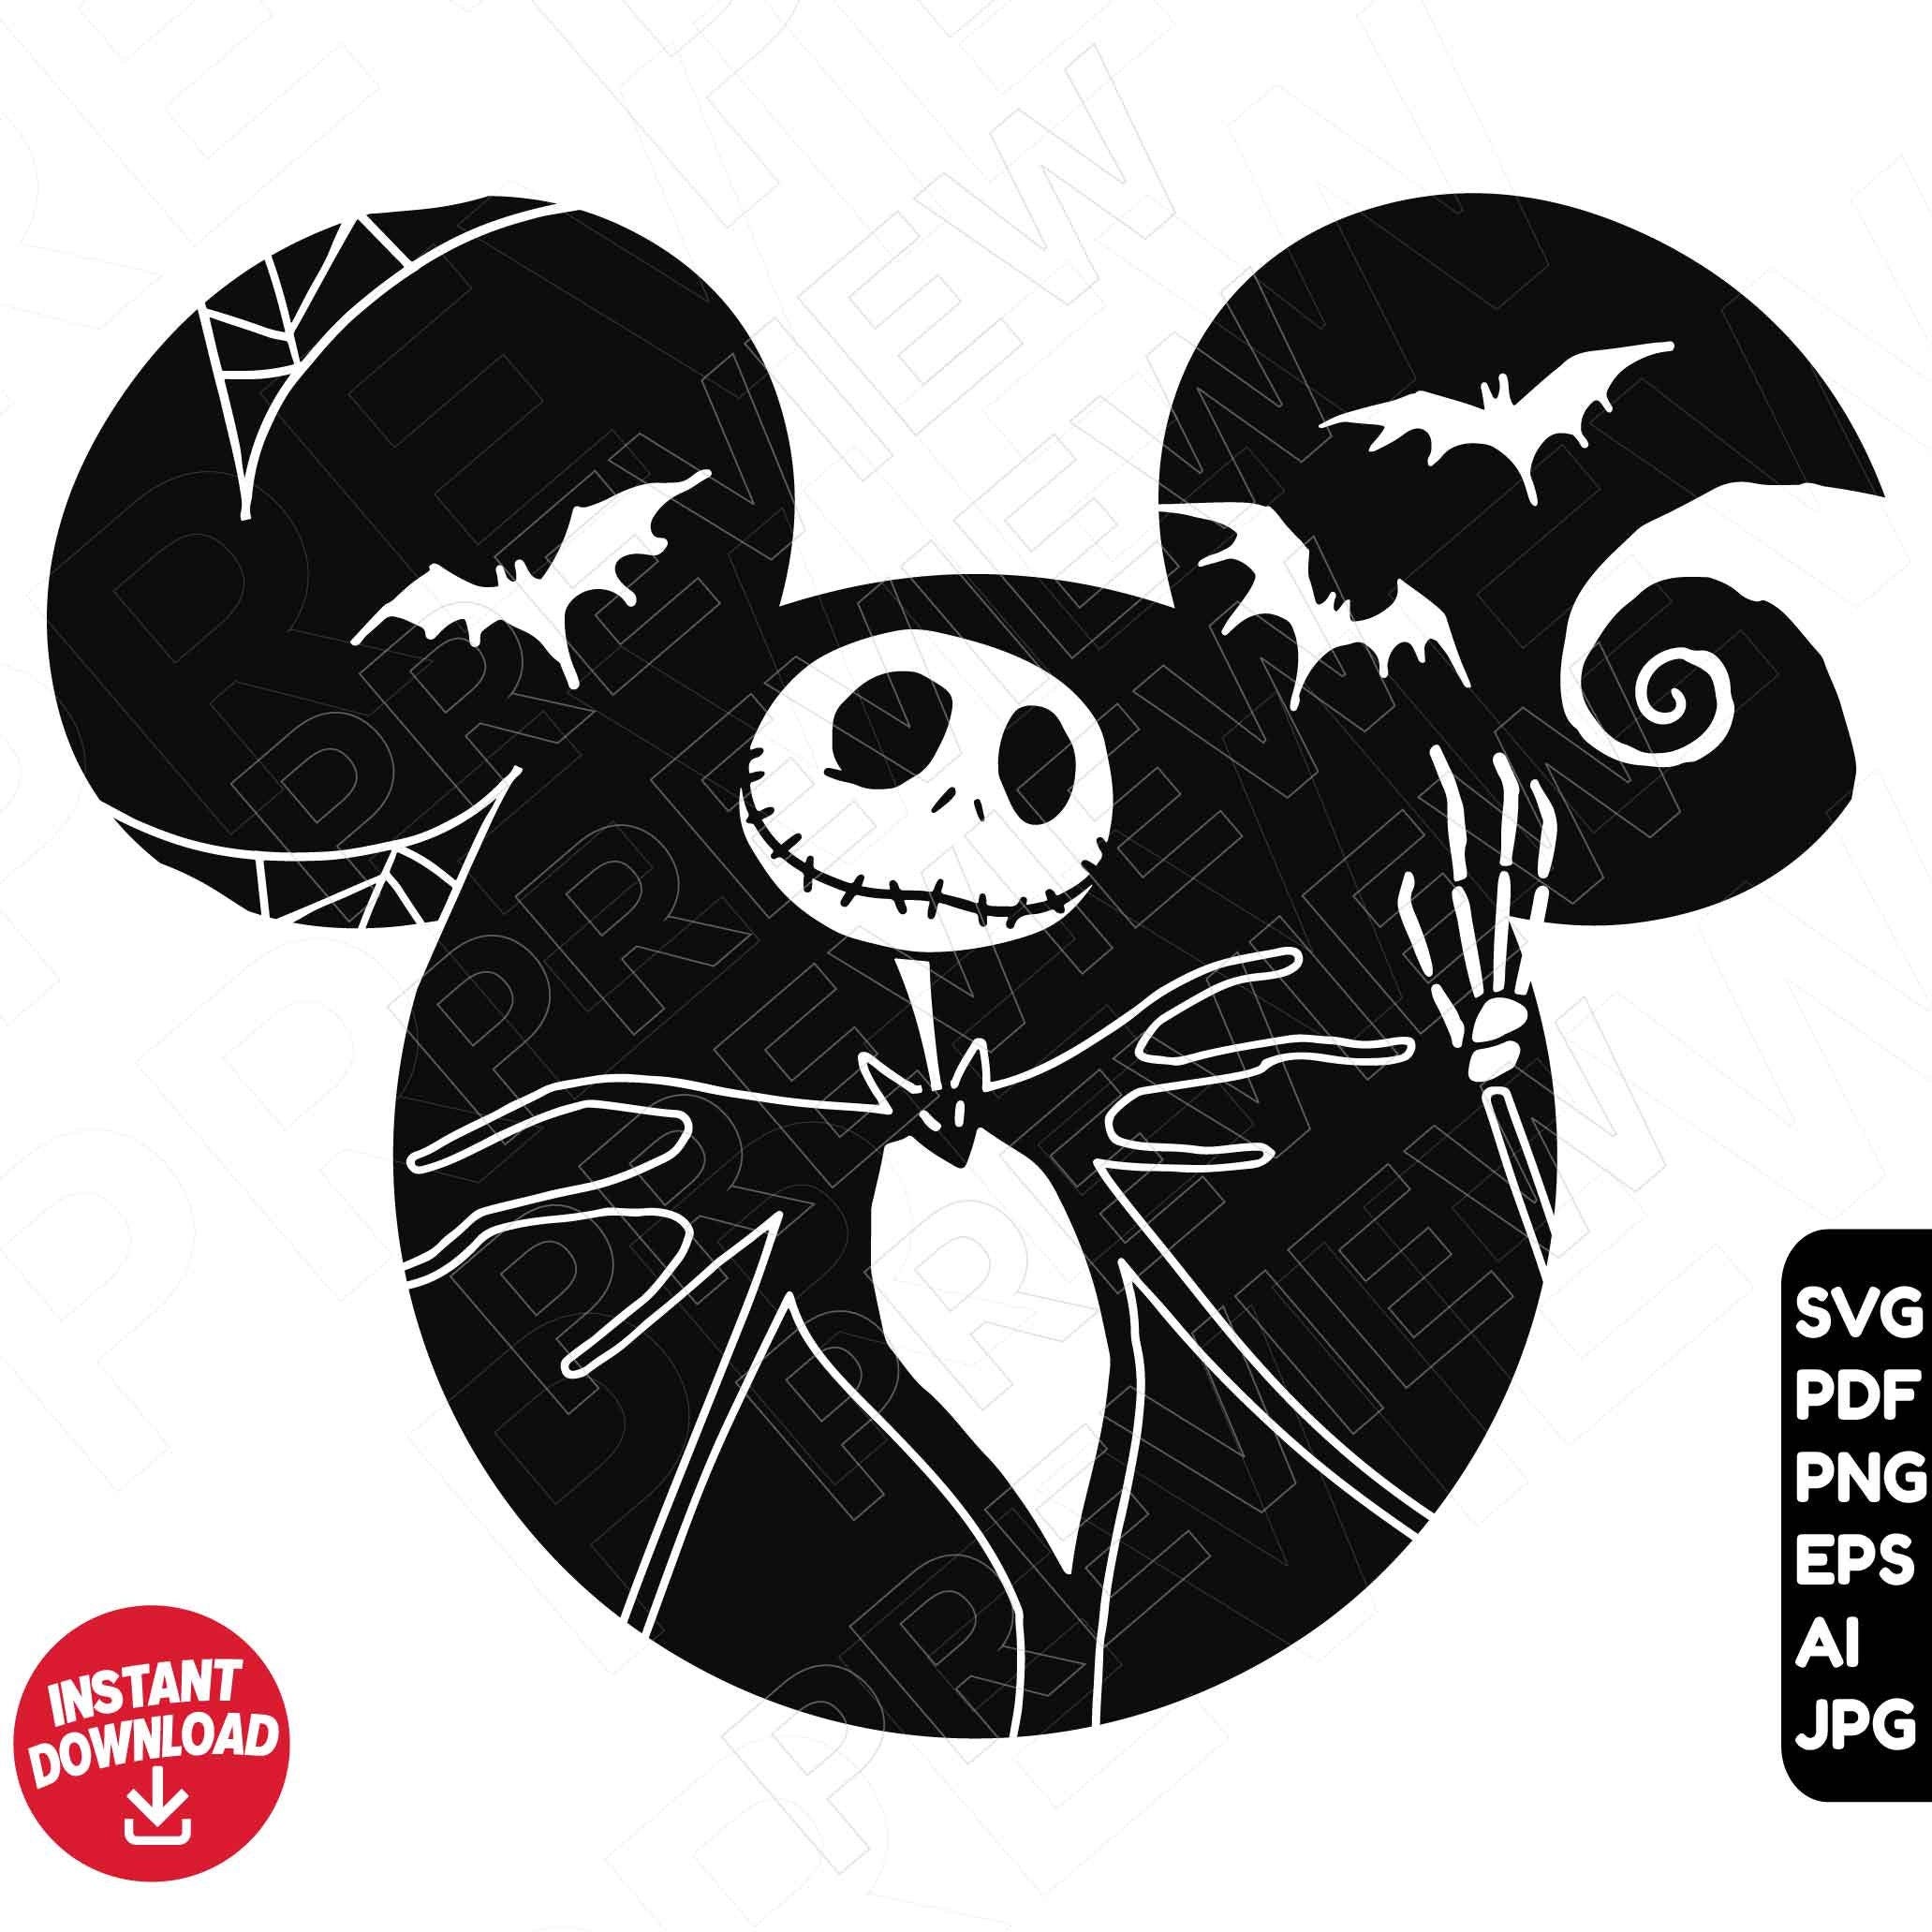 The Nightmare Before Christmas Jack SVG png clipart , Halloween SVG , cut file outline silhouette